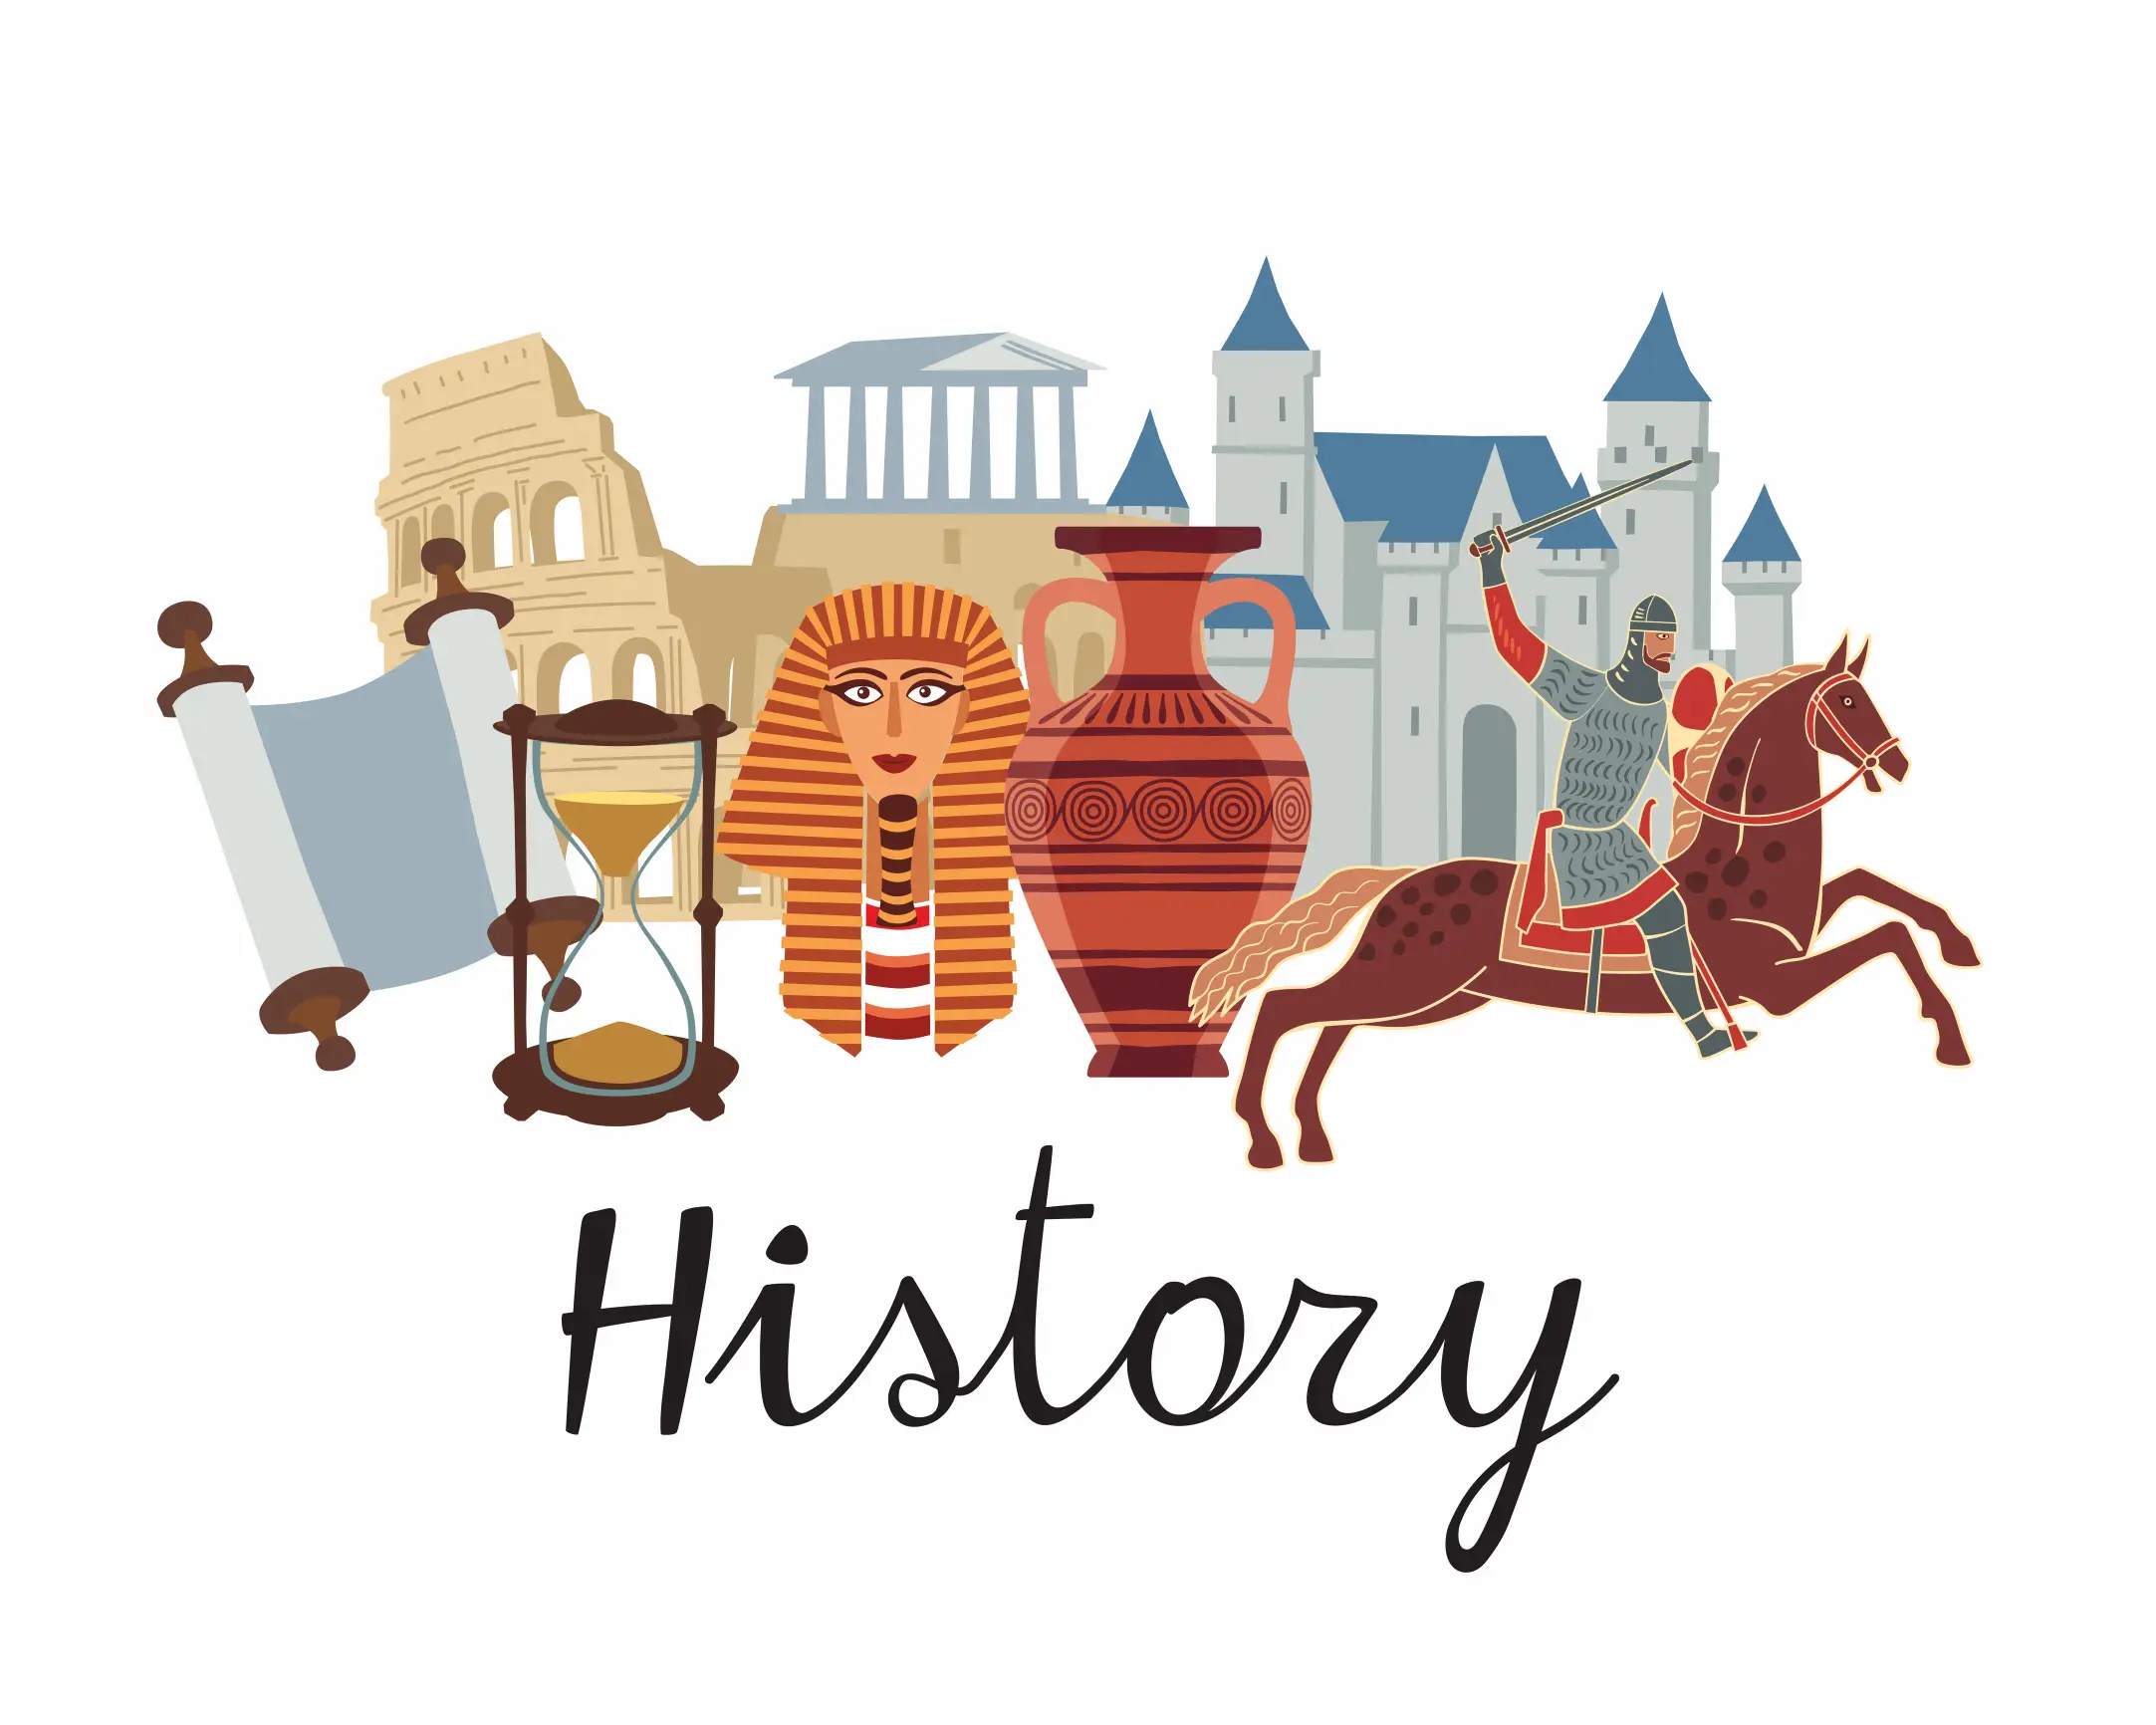 AP United States History and AP World History: What Course Should I Choose?